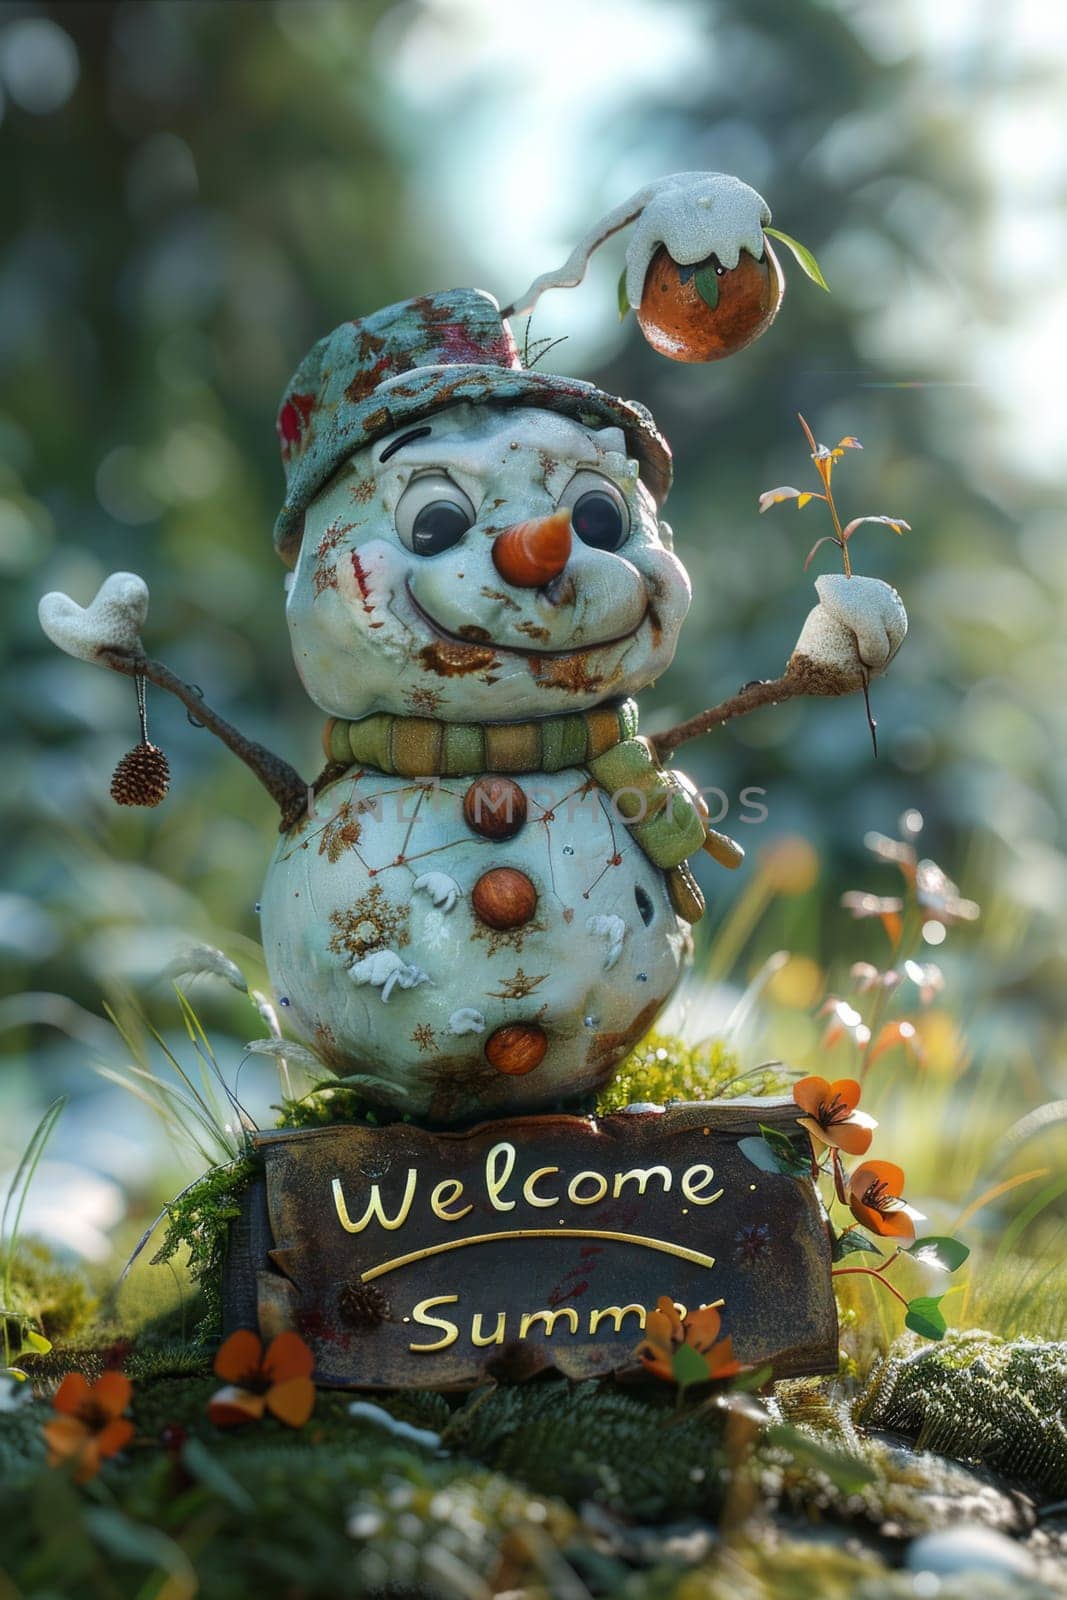 Funny little snowman in nature with the inscription Welcome summer on it.